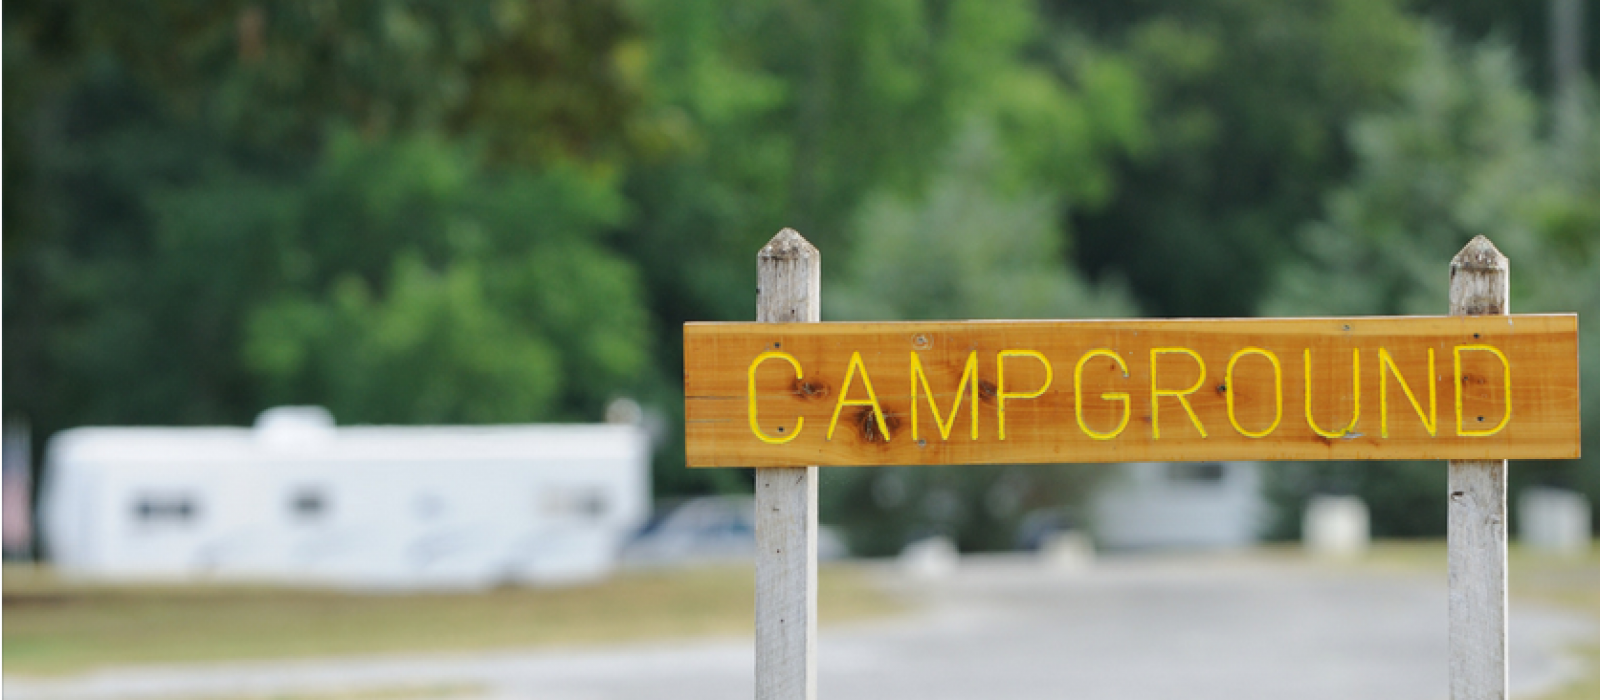 campground sign